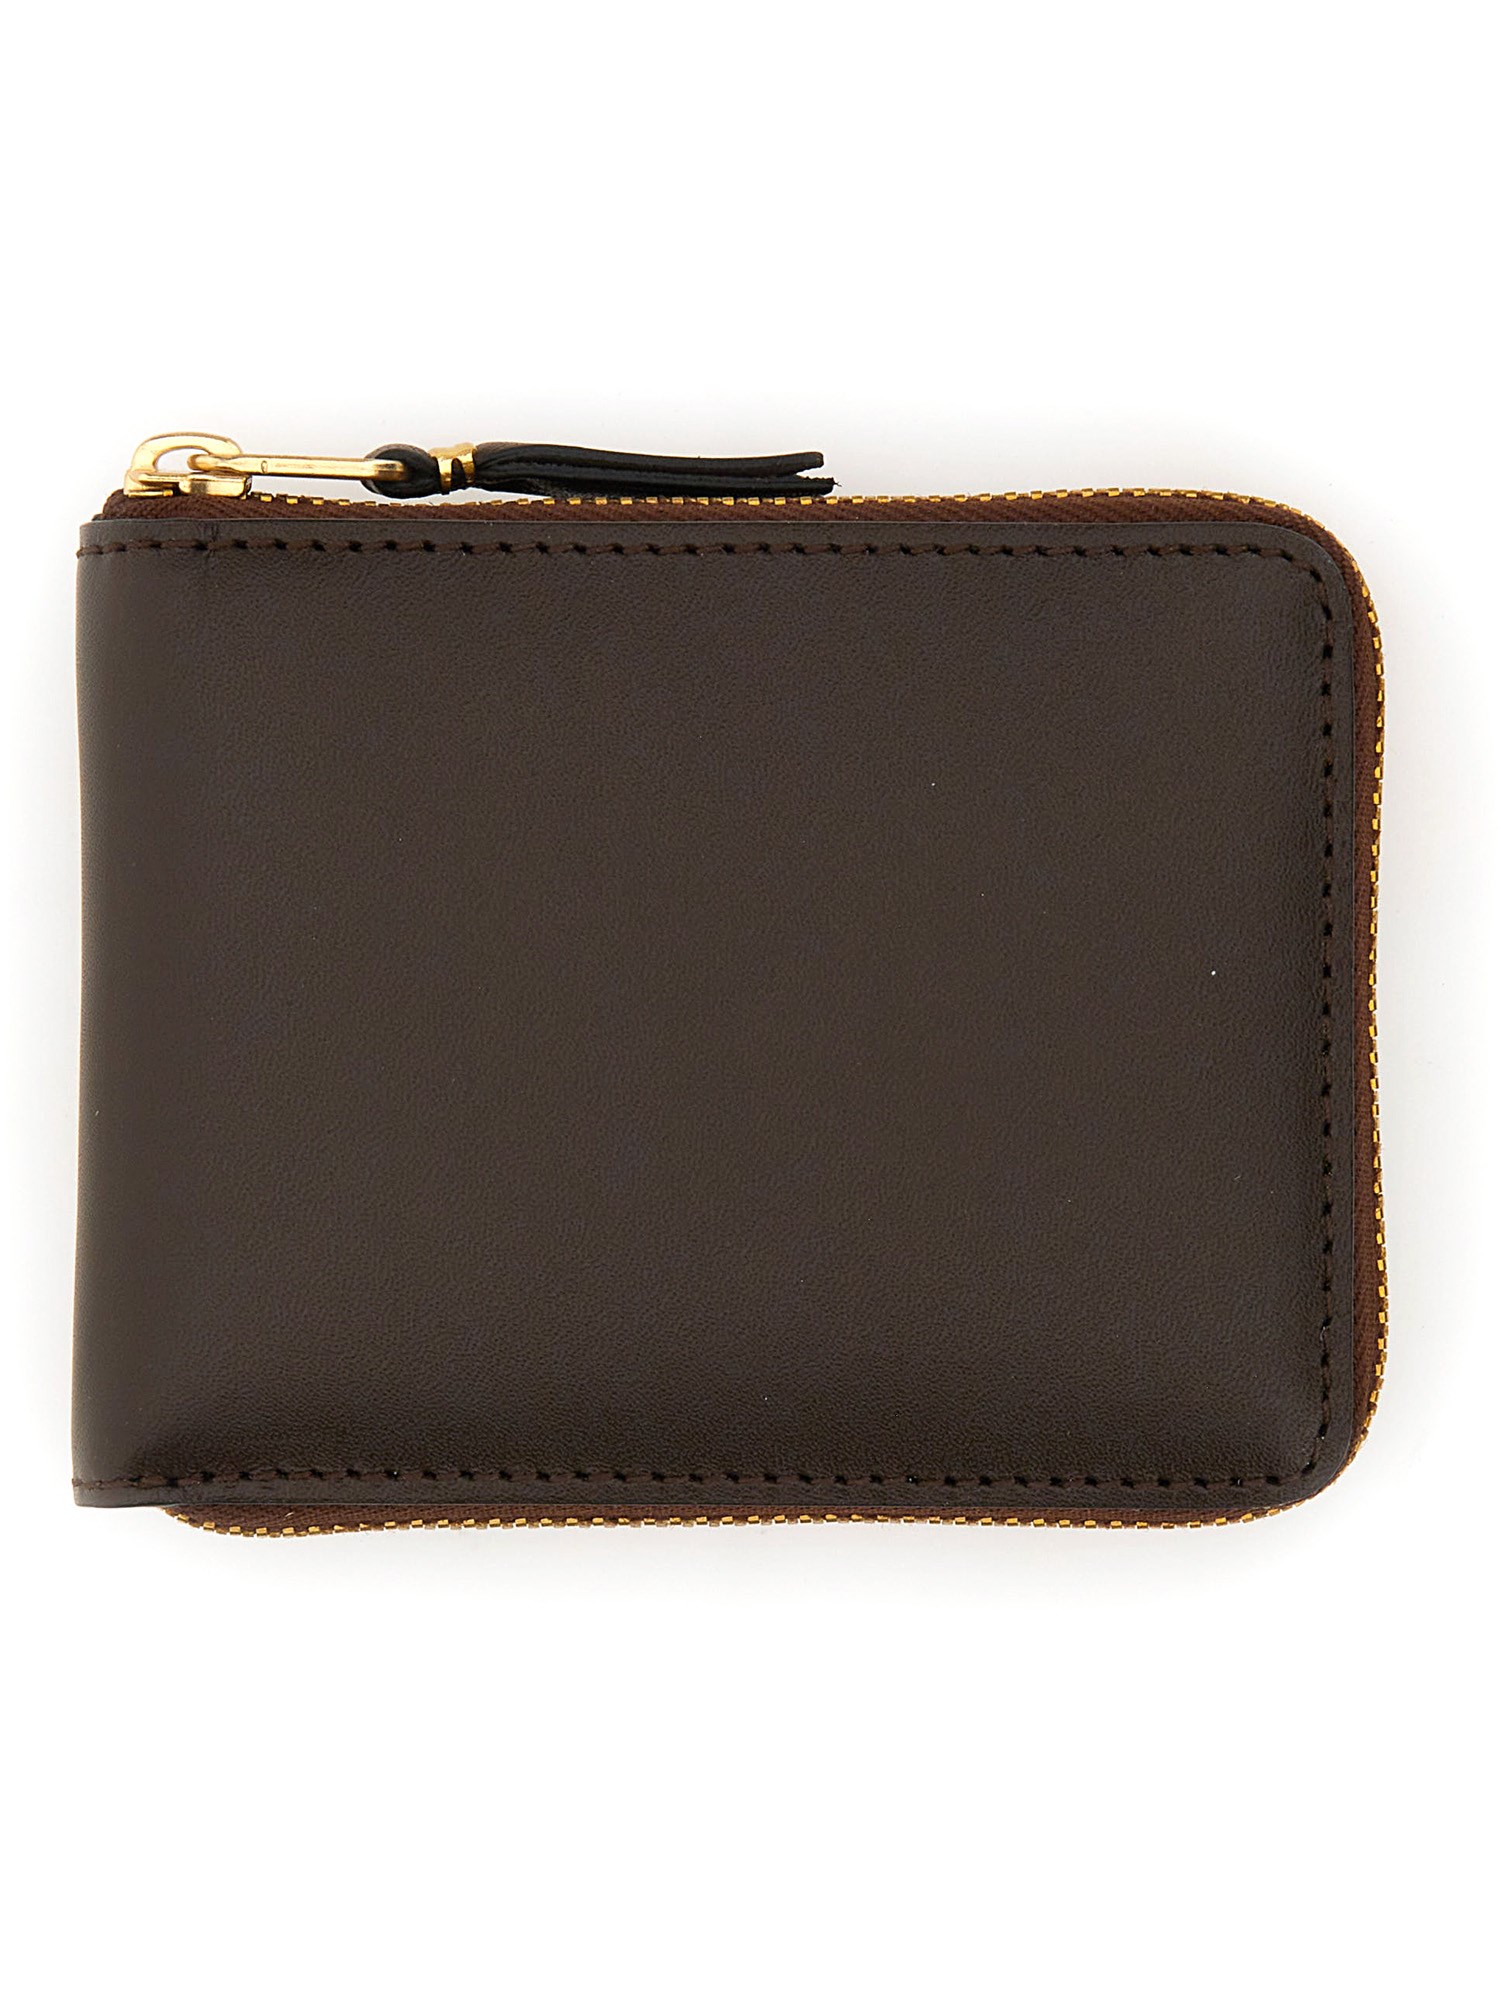 COMME DES GARCONS WALLET comme des garcons wallet leather wallet